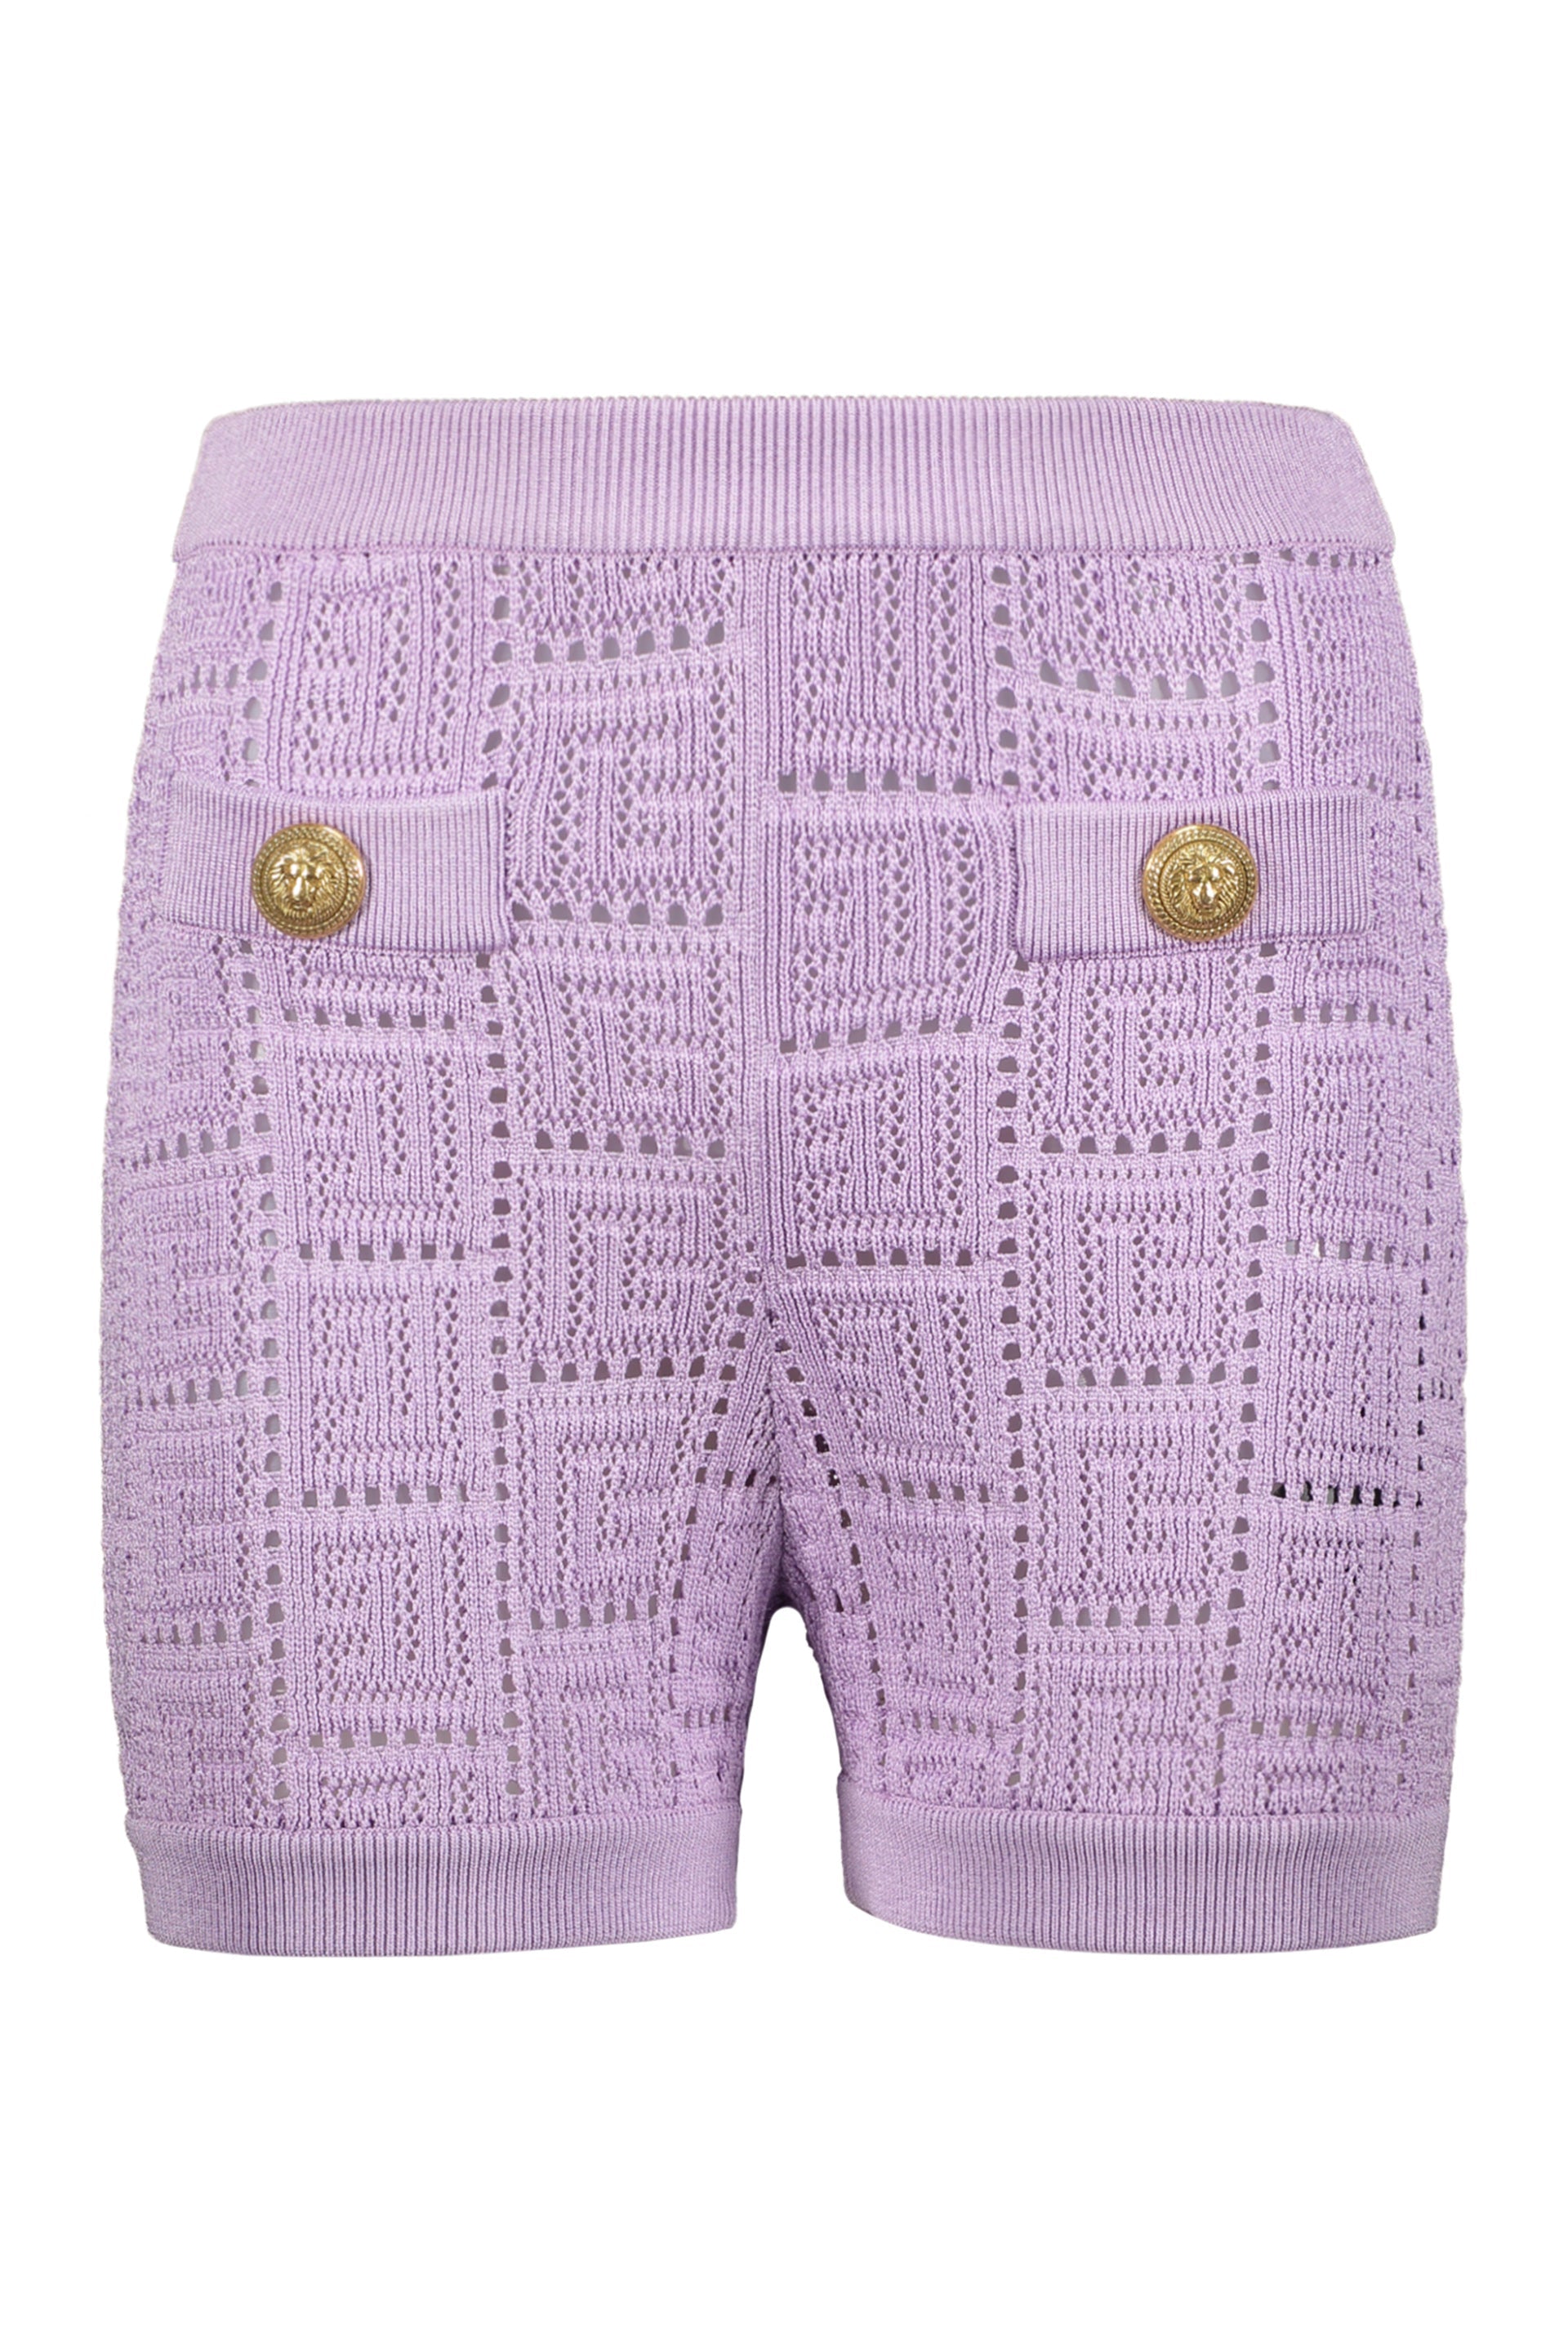 Balmain-OUTLET-SALE-Knitted-shorts-Hosen-34-ARCHIVE-COLLECTION.jpg